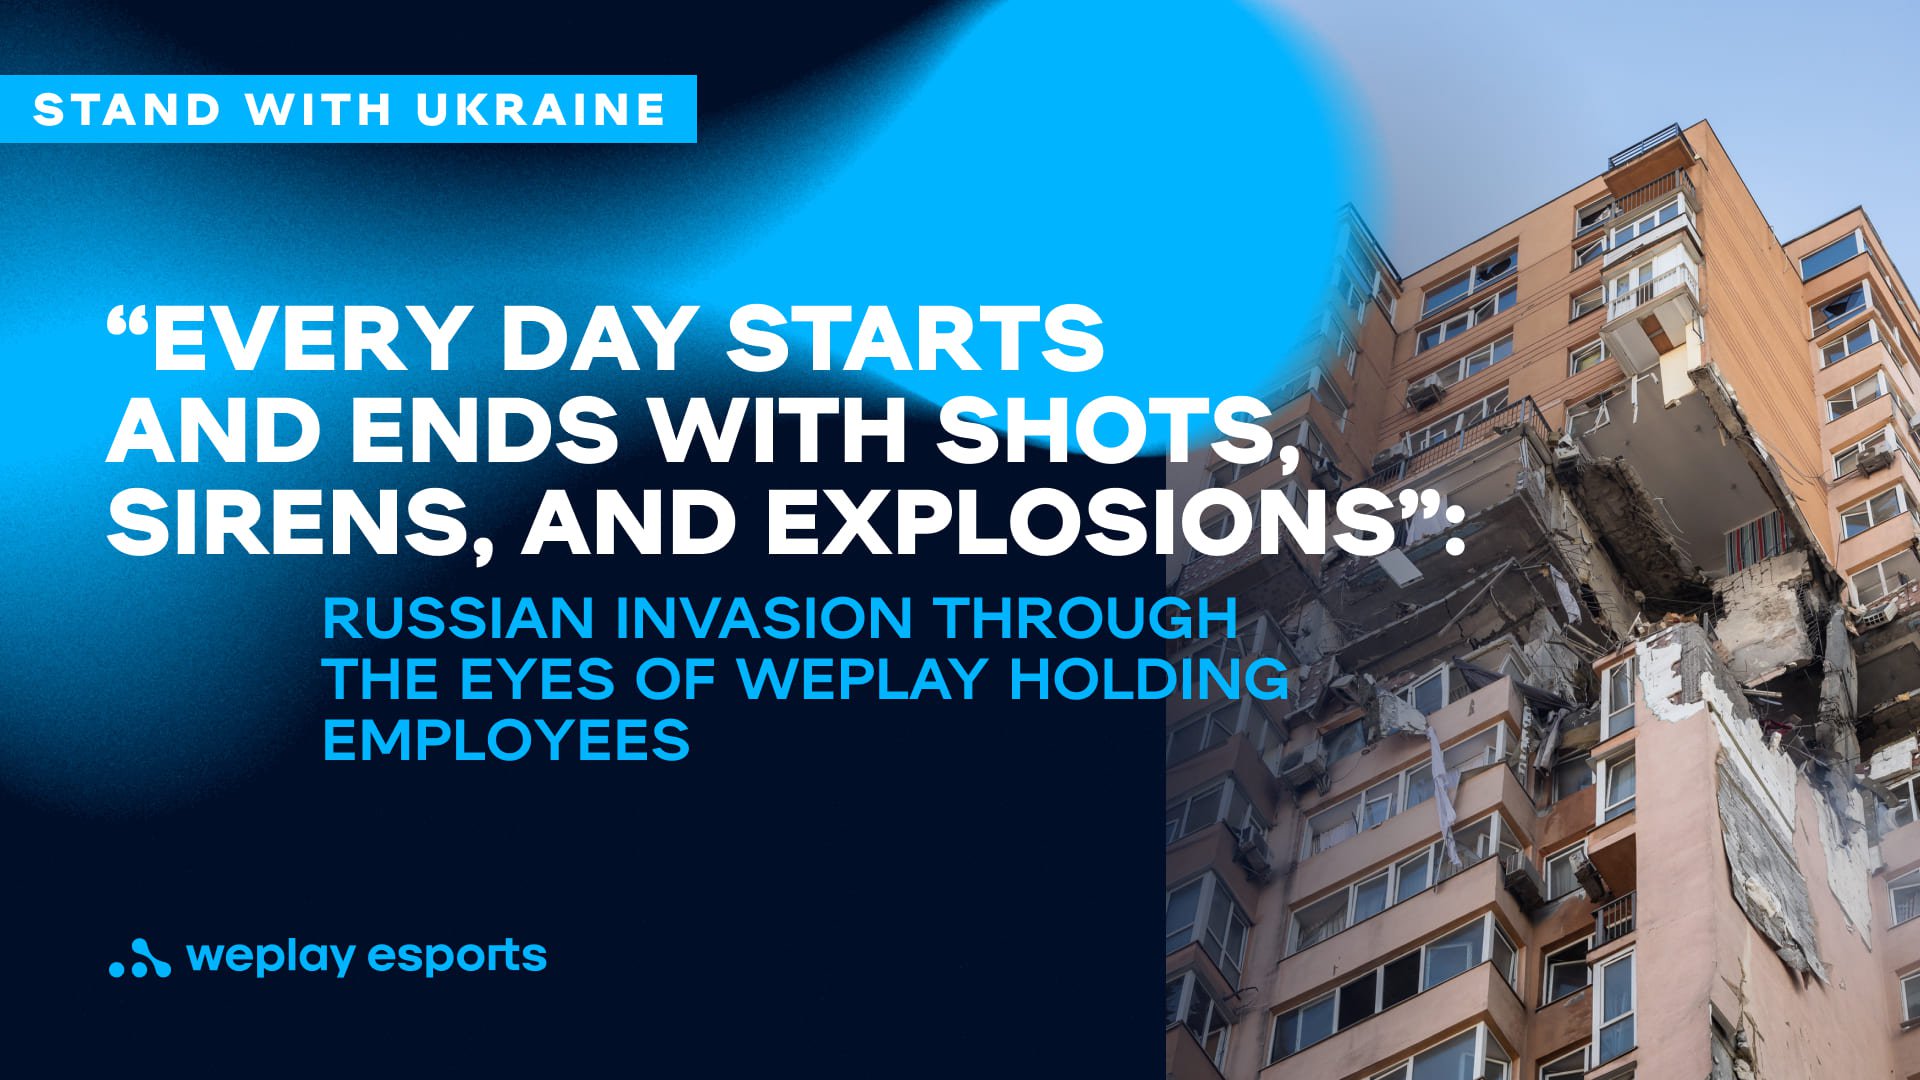 Russian invasion through the eyes of WePlay Holding employees. Credit: WePlay Holding